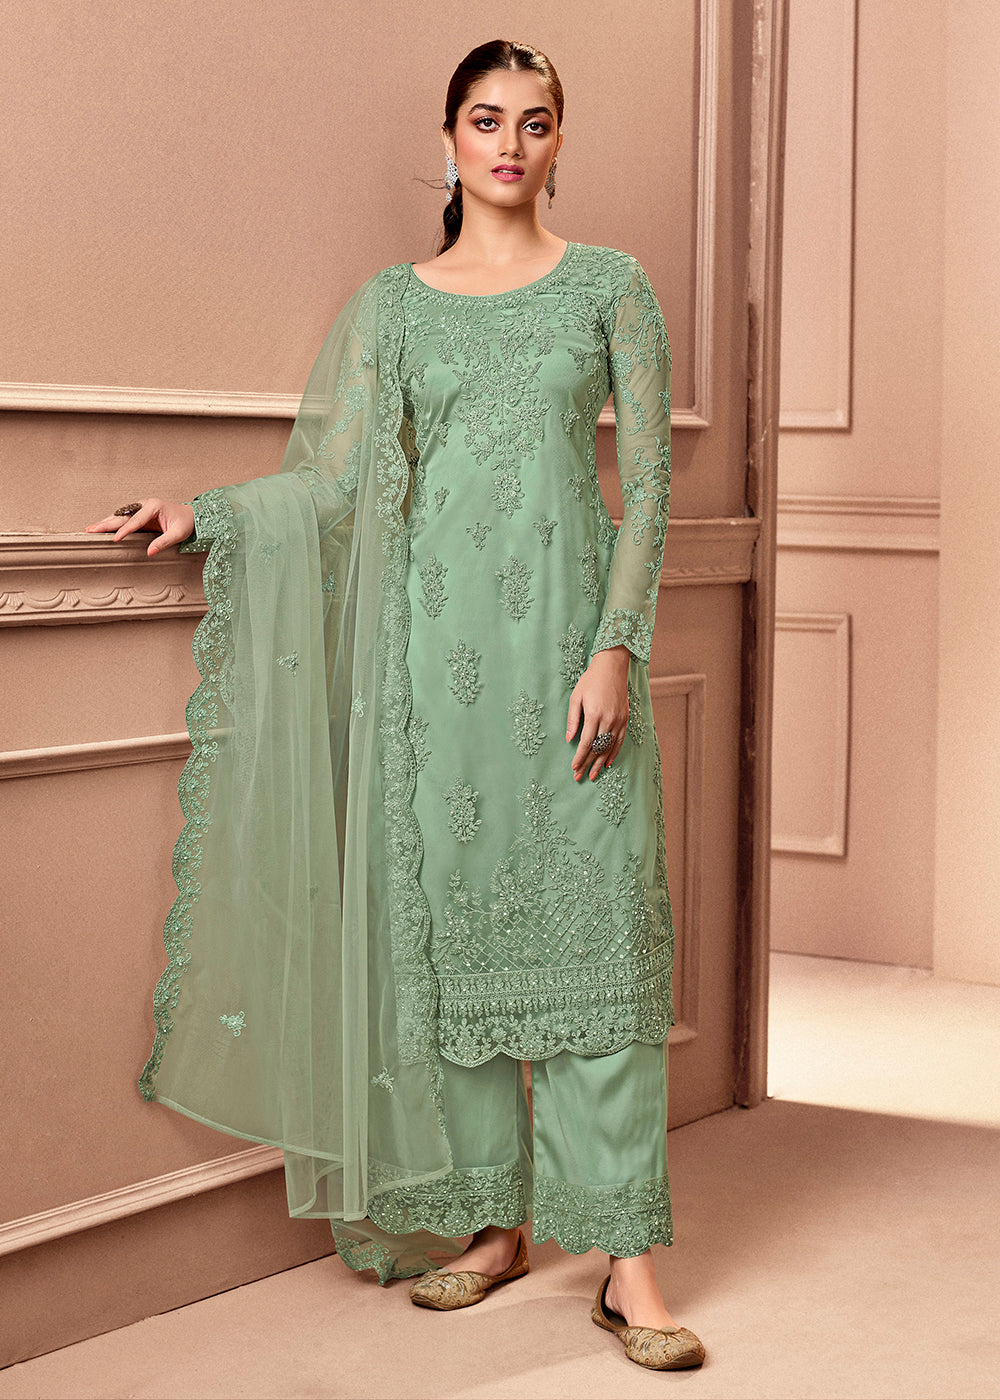 Buy Now Pant Style Mint Green Embroidered Wedding Salwar Suit Online in USA, UK, Canada & Worldwide at Empress Clothing. 